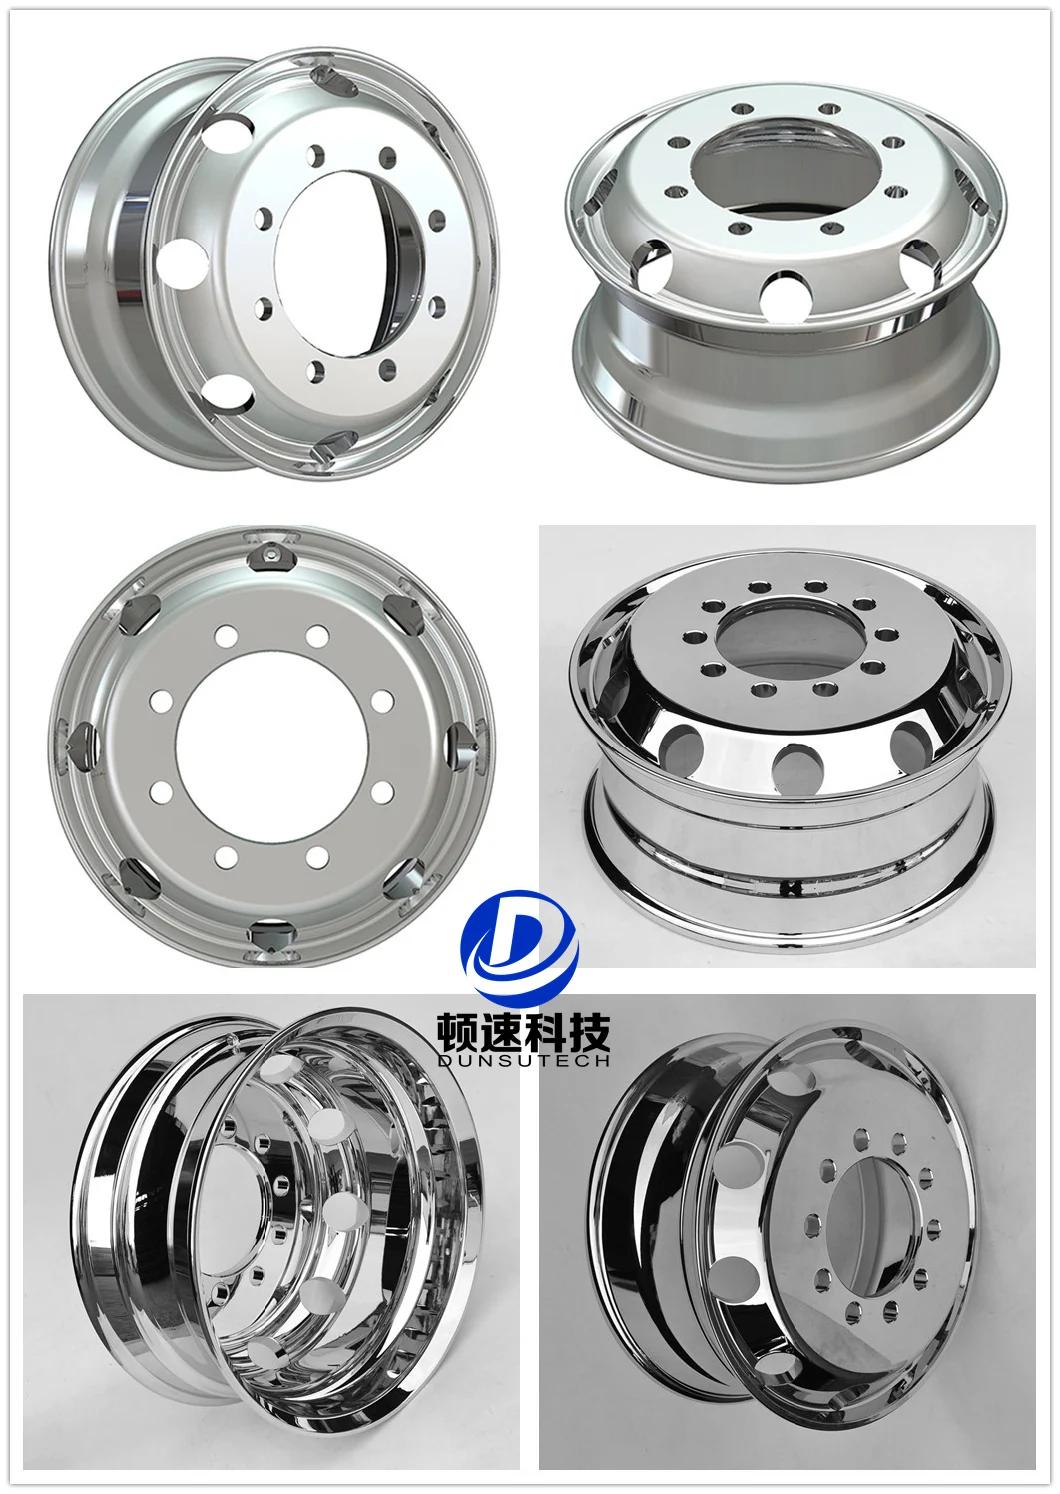 High Quality Wheel 225X825 Hot Sale Chromeplated Truck Wheels New Stainless Steel Disc